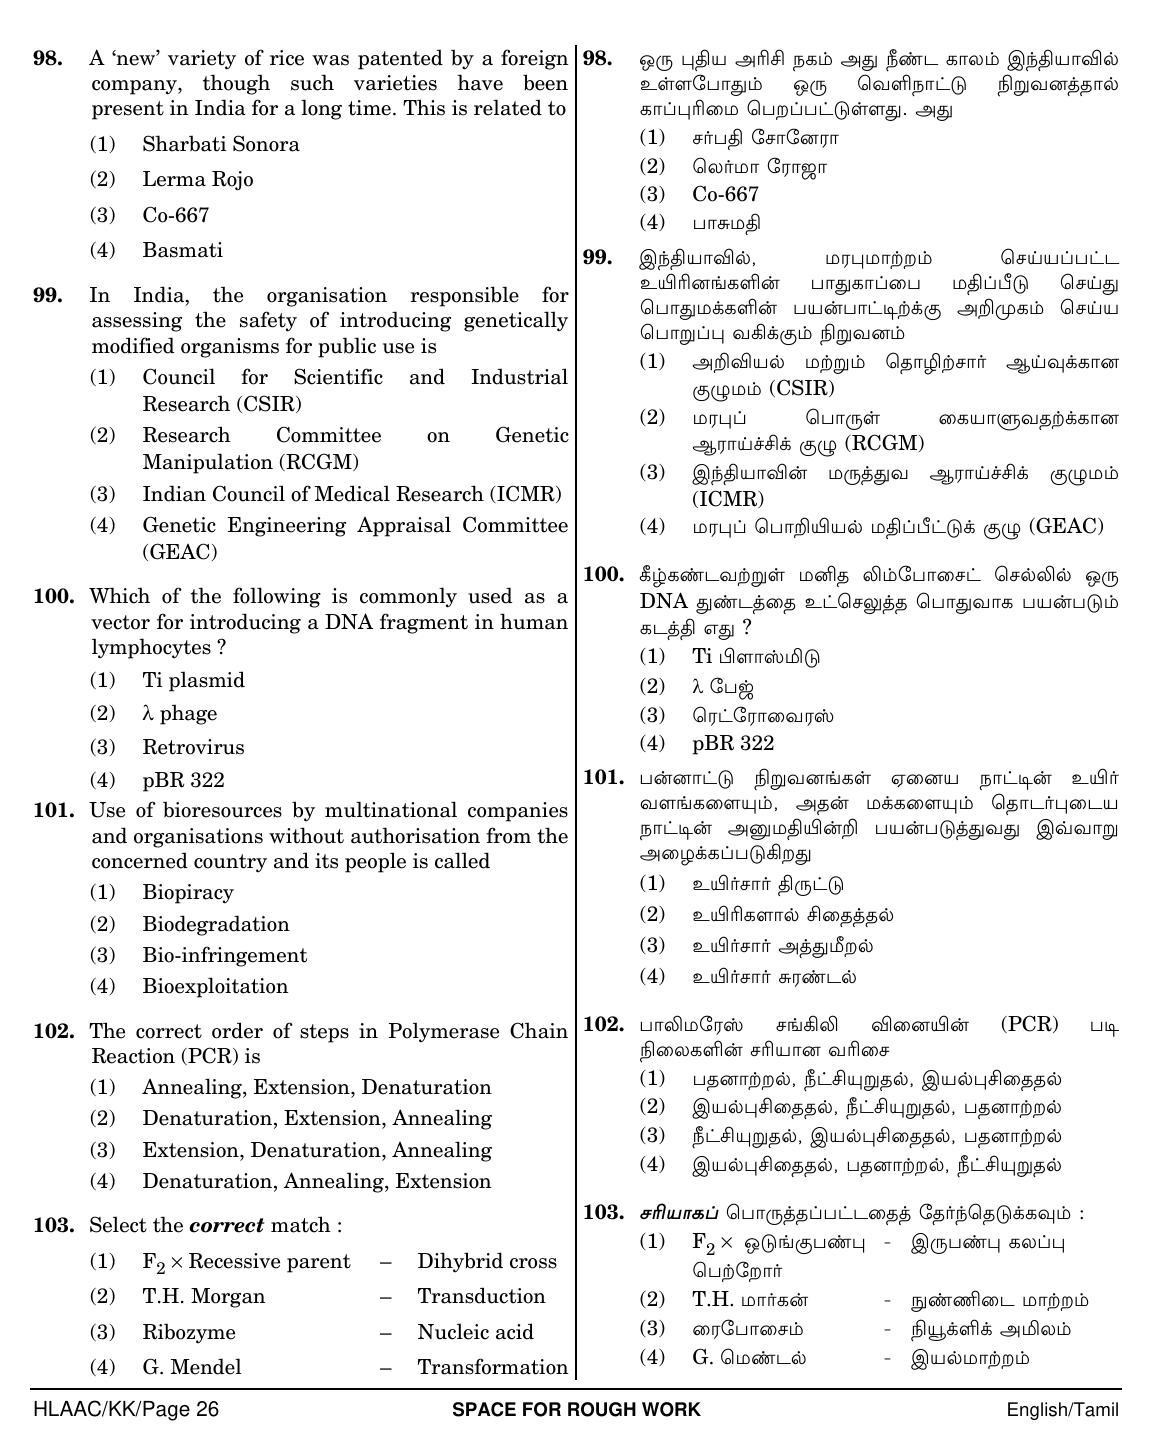 NEET Tamil KK 2018 Question Paper - Page 26